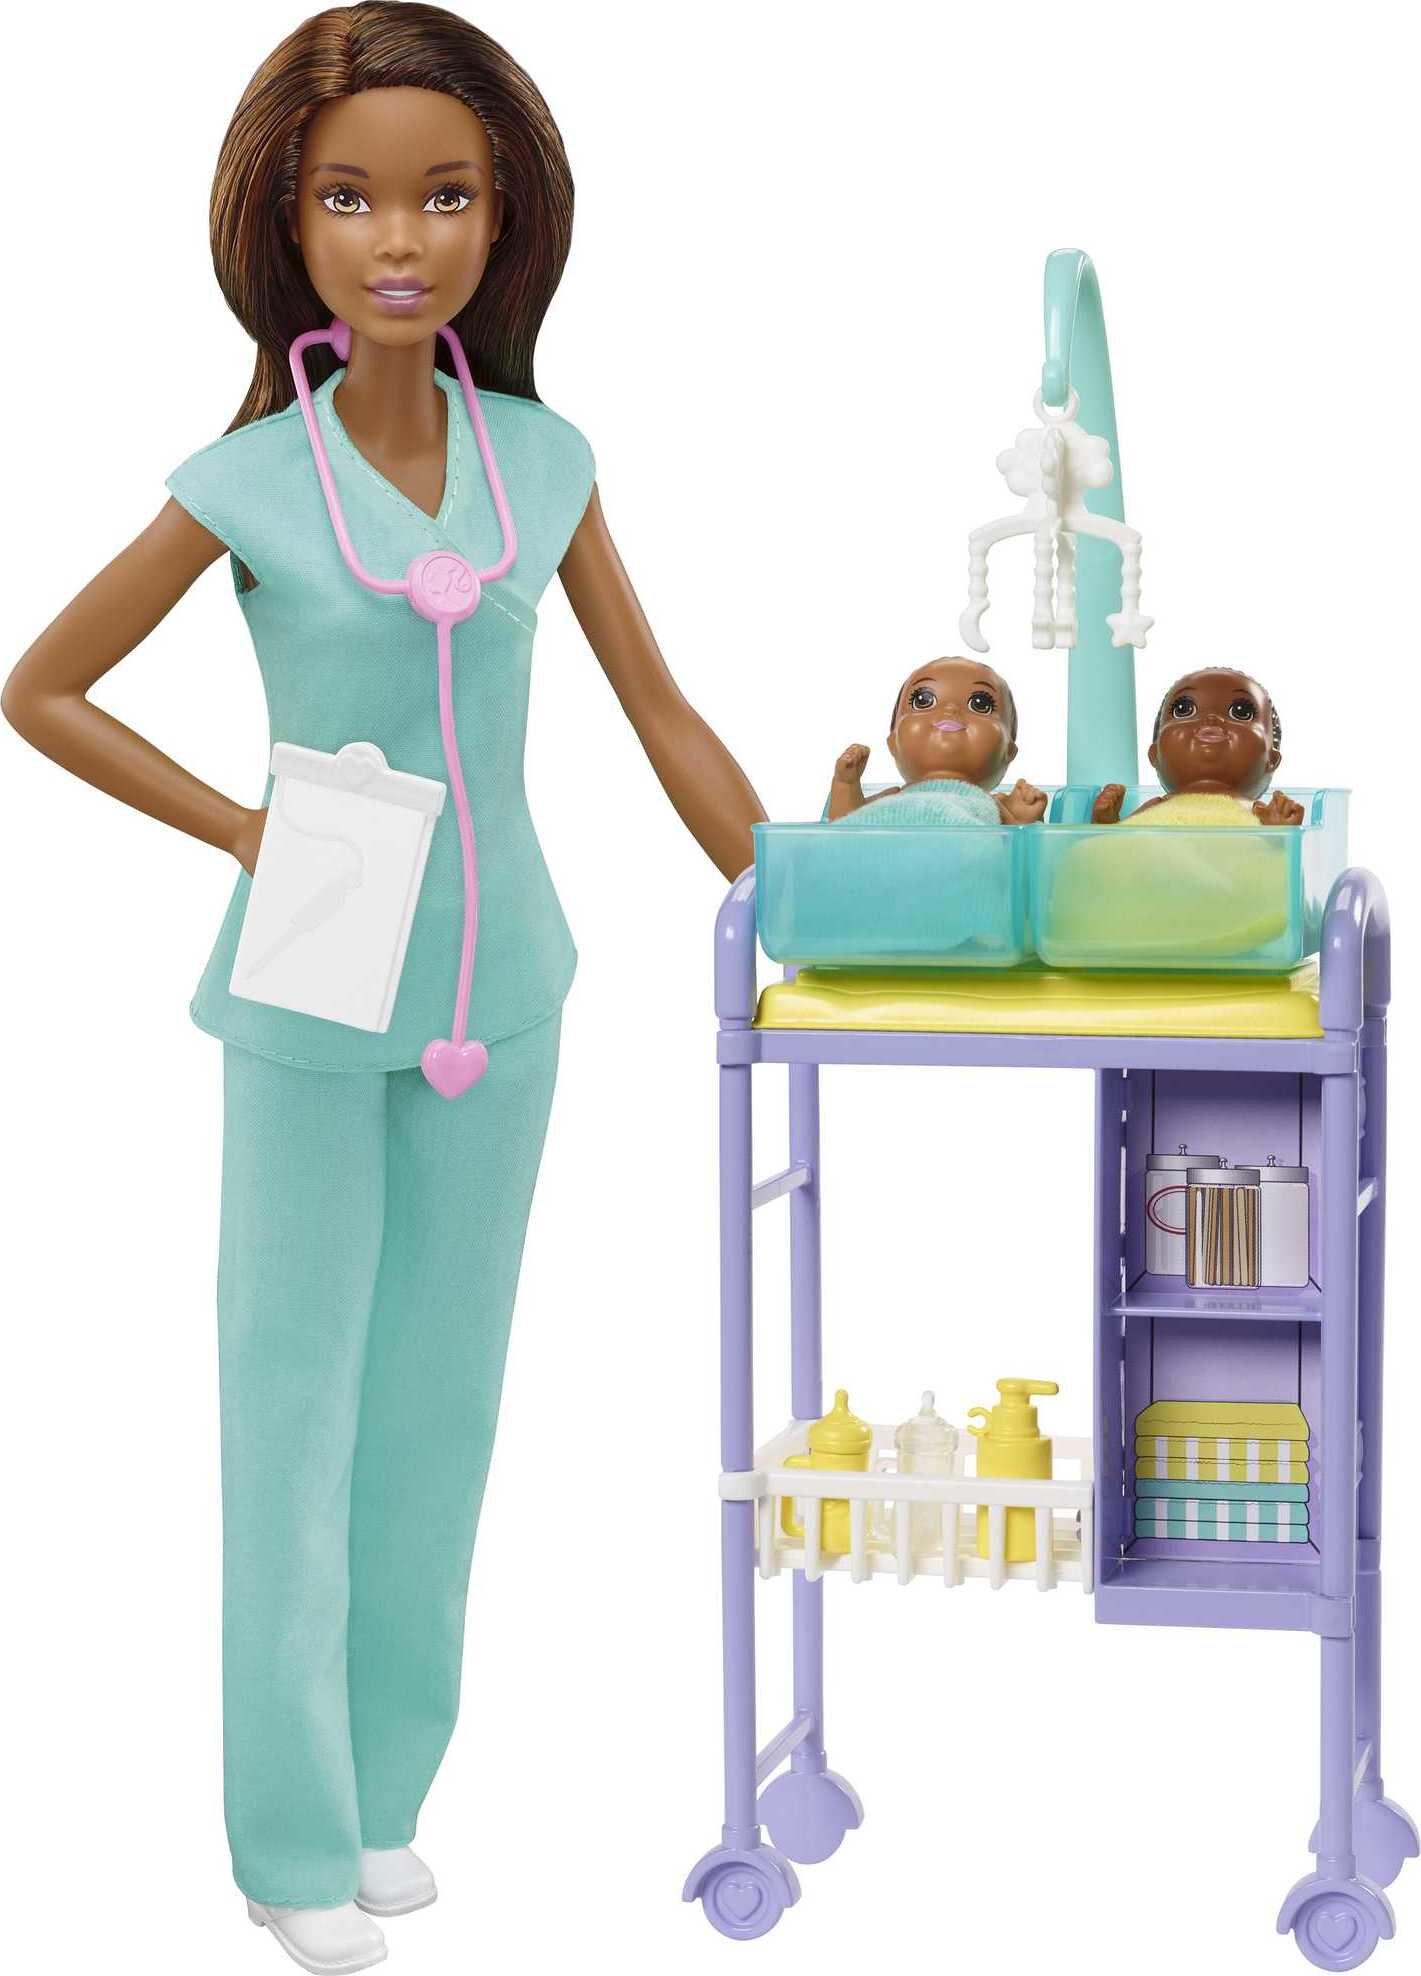 Barbie Careers Baby Doctor Playset with Brunette Fashion Doll, 2 Baby Dolls, Furniture & Accessories - image 1 of 6